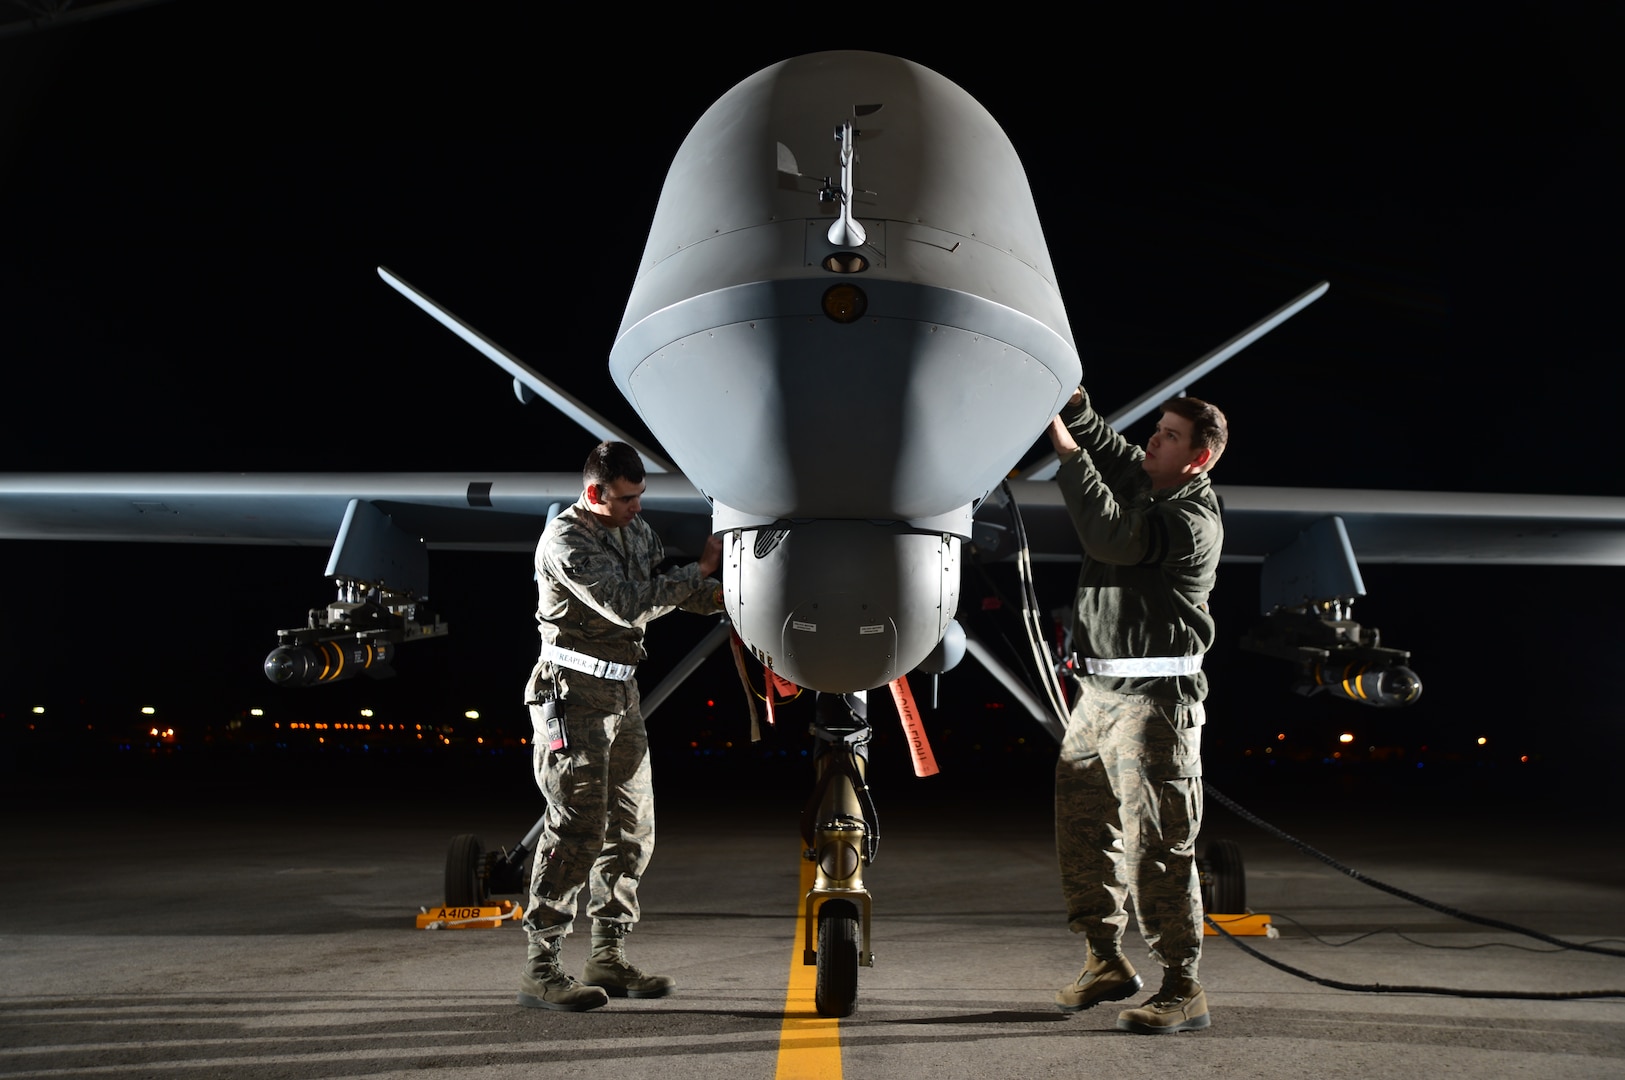 Airman 1st Class Steven (left) and Airman 1st Class Taylor prepare an MQ-9 Reaper for flight during exercise Combat Hammer, May 15, 2014, at Creech Air Force Base, Nev. 
(U.S. Air Force photo by Staff Sgt. Nadine Barclay)